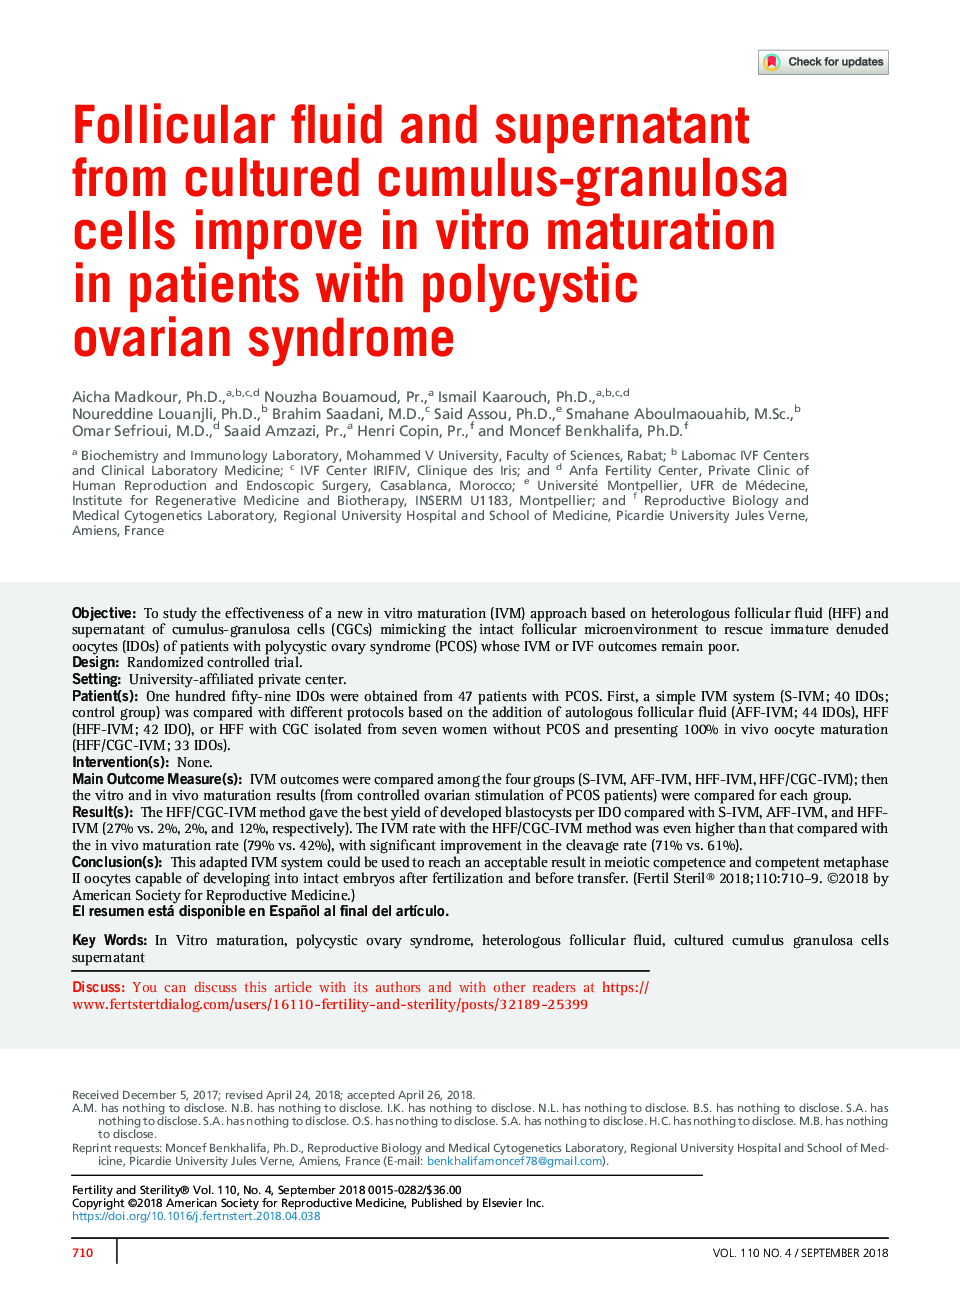 Follicular fluid and supernatant from cultured cumulus-granulosa cells improve inÂ vitro maturation in patients with polycystic ovarian syndrome